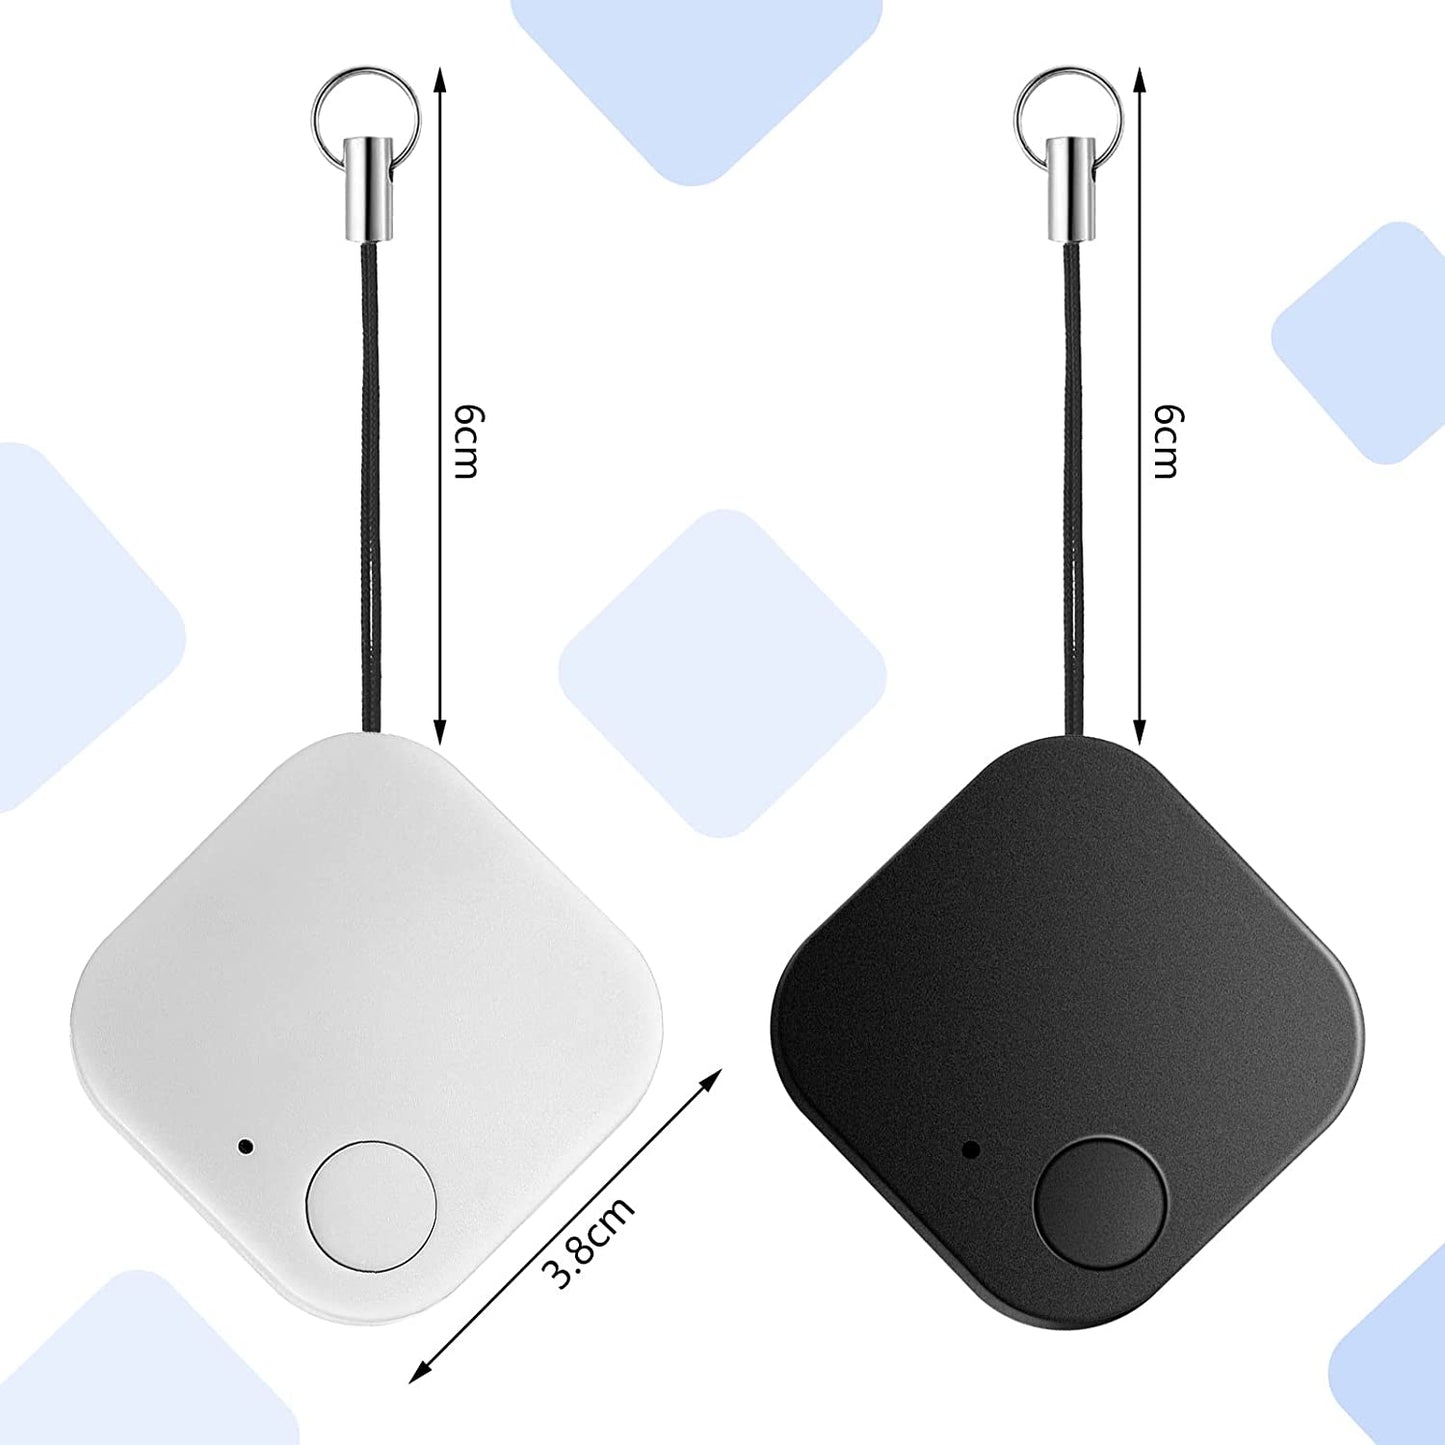 New iTrack Key Finder with Bluetooth